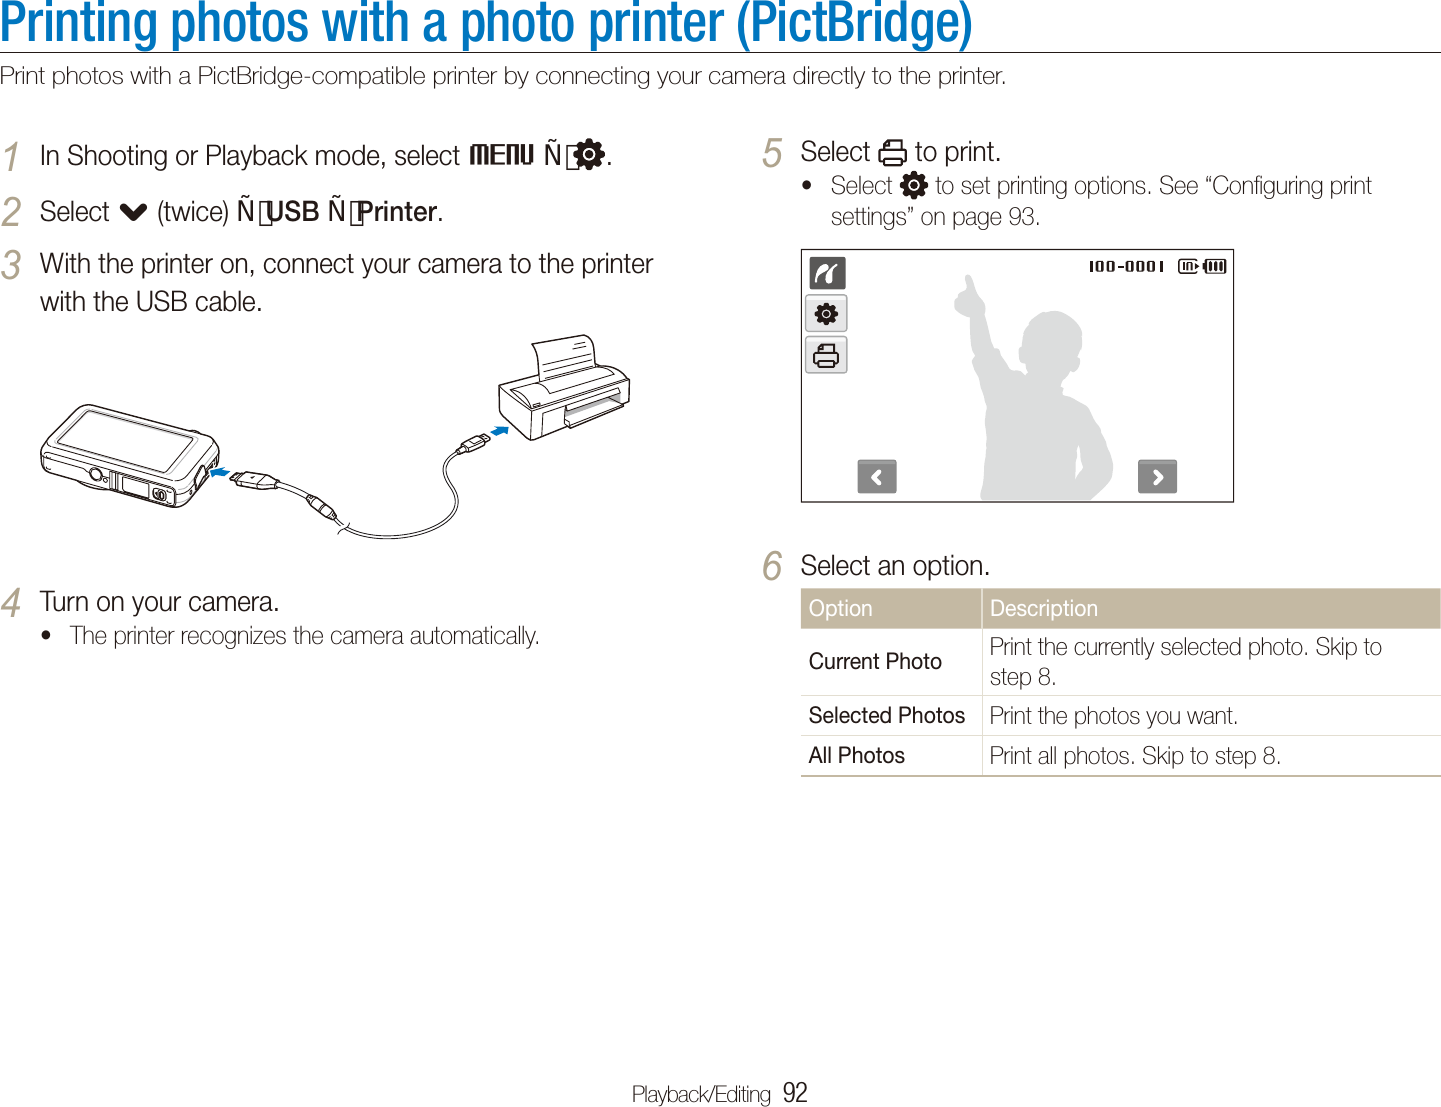 Playback/Editing  92Printing photos with a photo printer (PictBridge)Print photos with a PictBridge-compatible printer by connecting your camera directly to the printer.Select 5  to print.Select t  to set printing options. See “Conﬁguring print settings” on page 93.Select an option.6 Option DescriptionCurrent Photo Print the currently selected photo. Skip to step 8.Selected Photos Print the photos you want.All Photos Print all photos. Skip to step 8.In Shooting or Playback mode, select 1 M  .Select 2 . (twice) USB Printer.With the printer on, connect your camera to the printer 3 with the USB cable.Turn on your camera.4 The printer recognizes the camera automatically.t